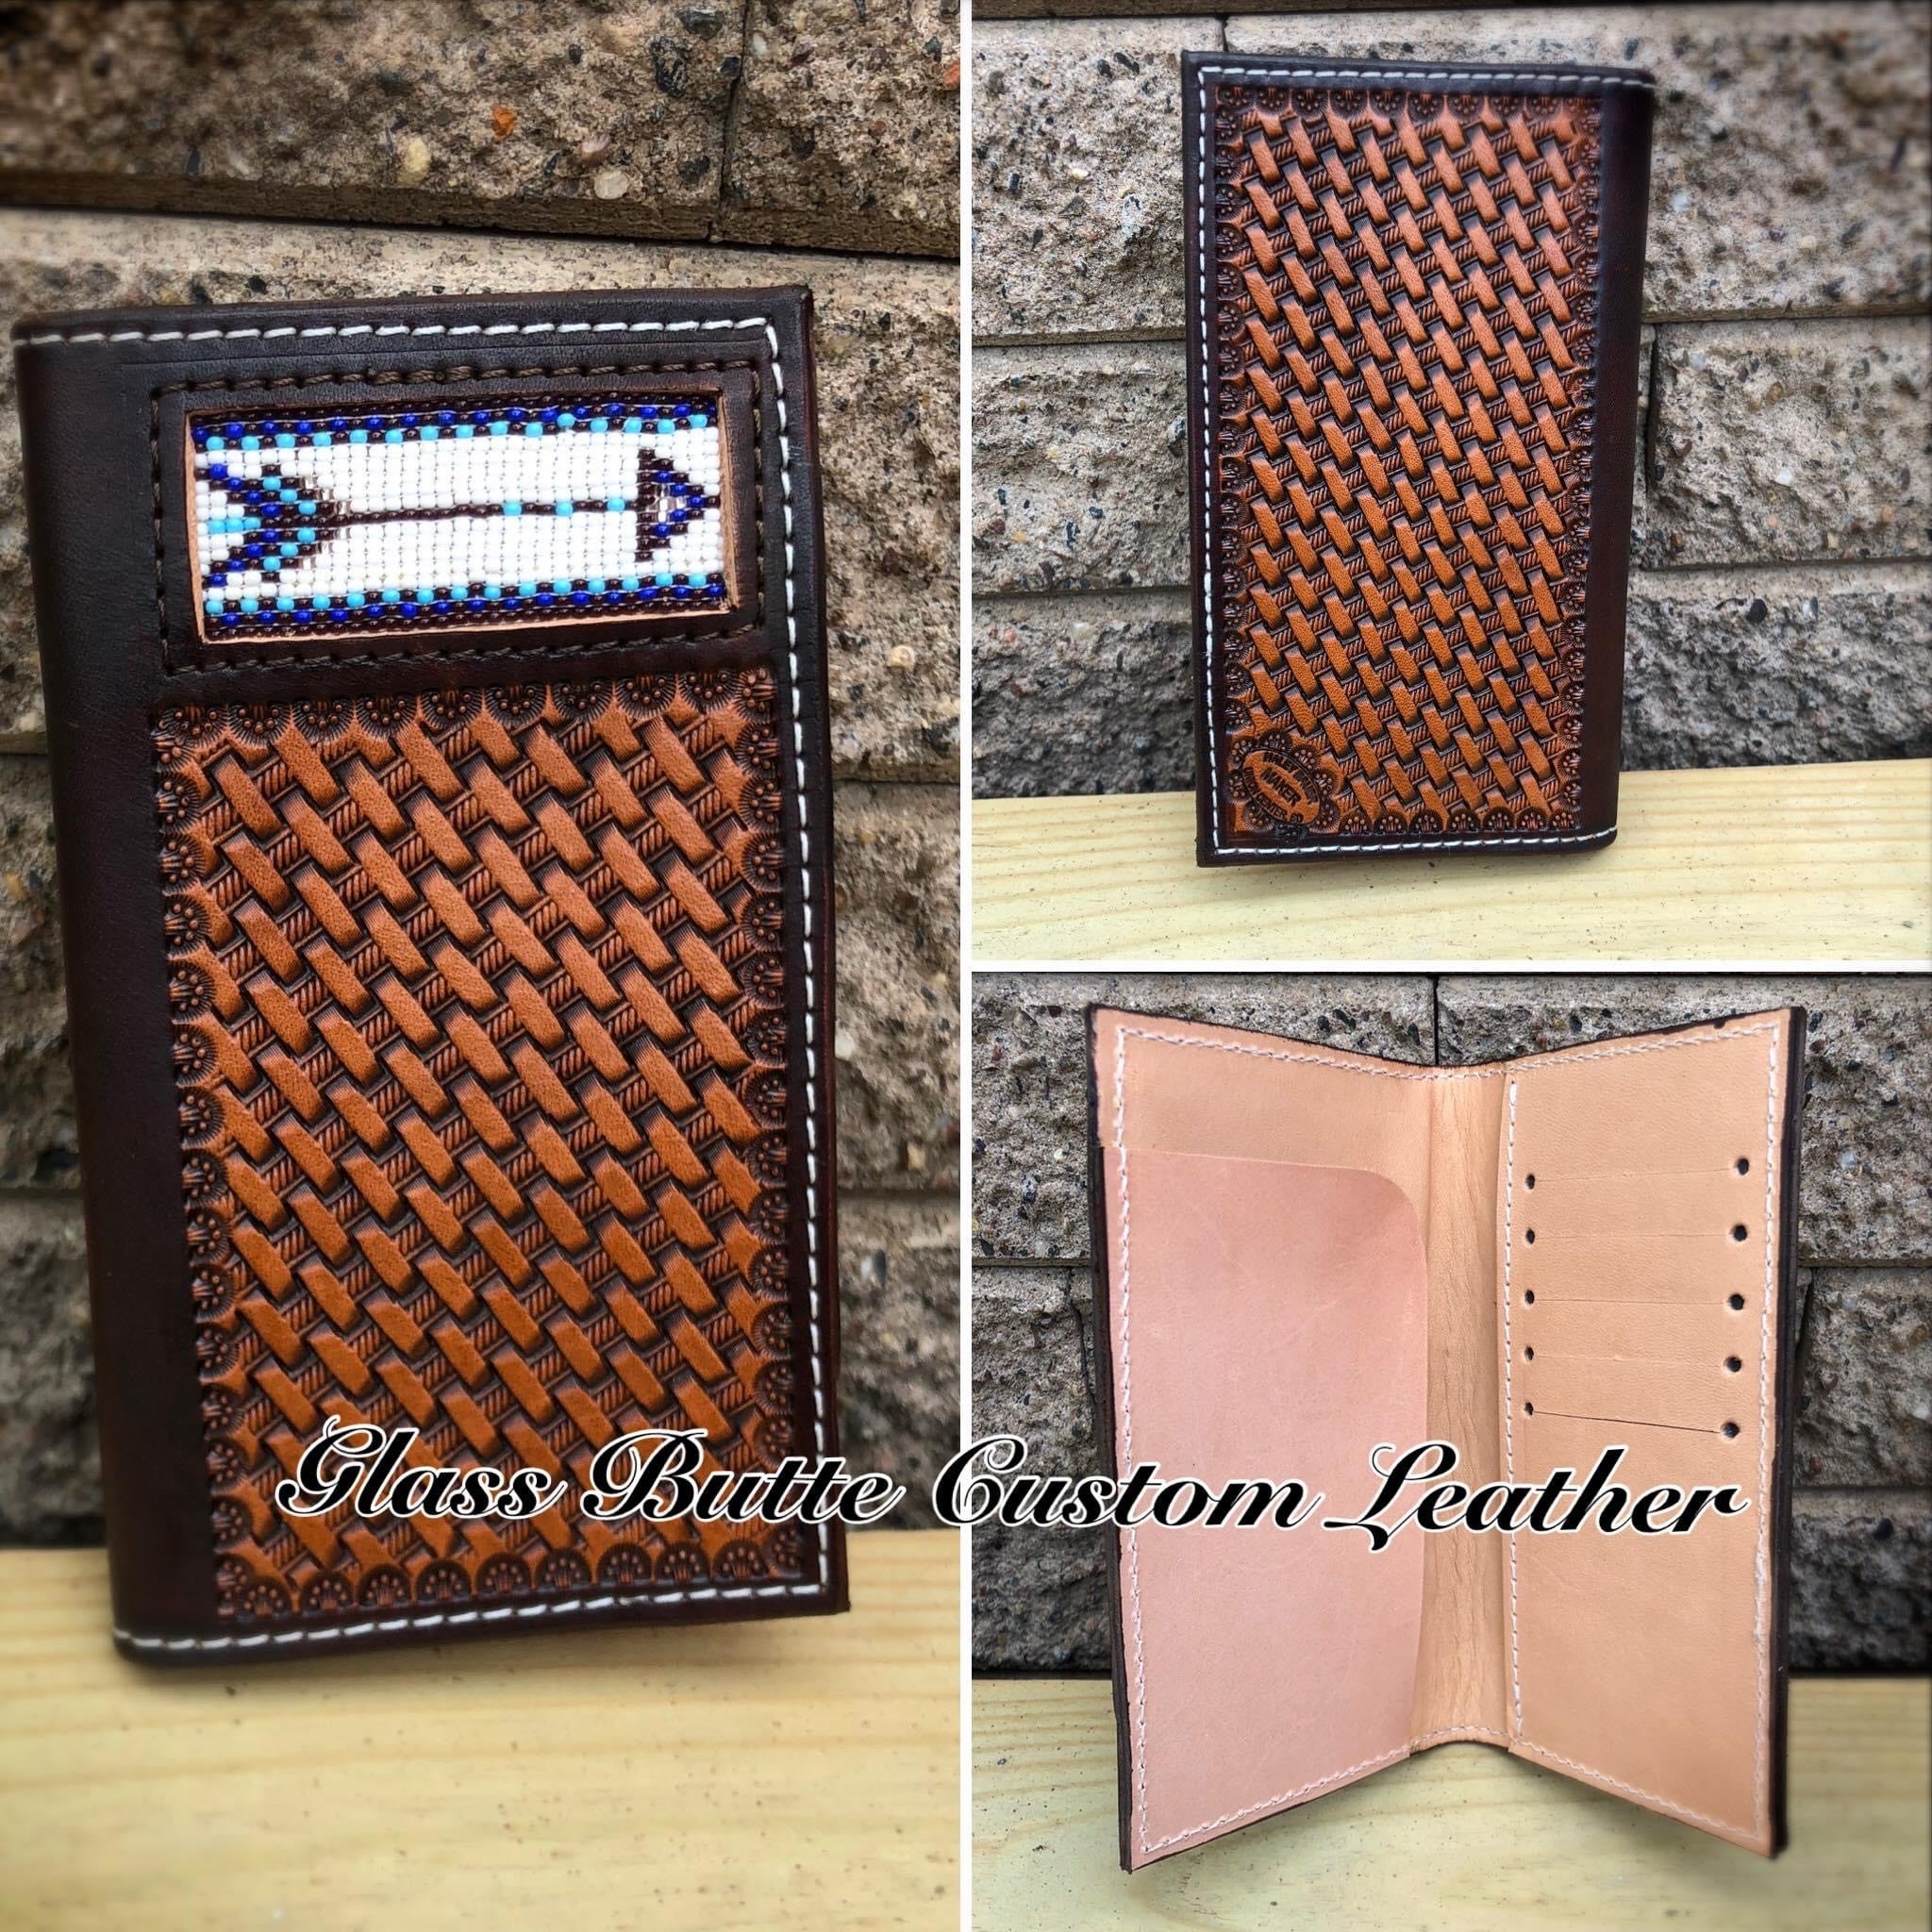 Home  Glass Butte Custom Leather